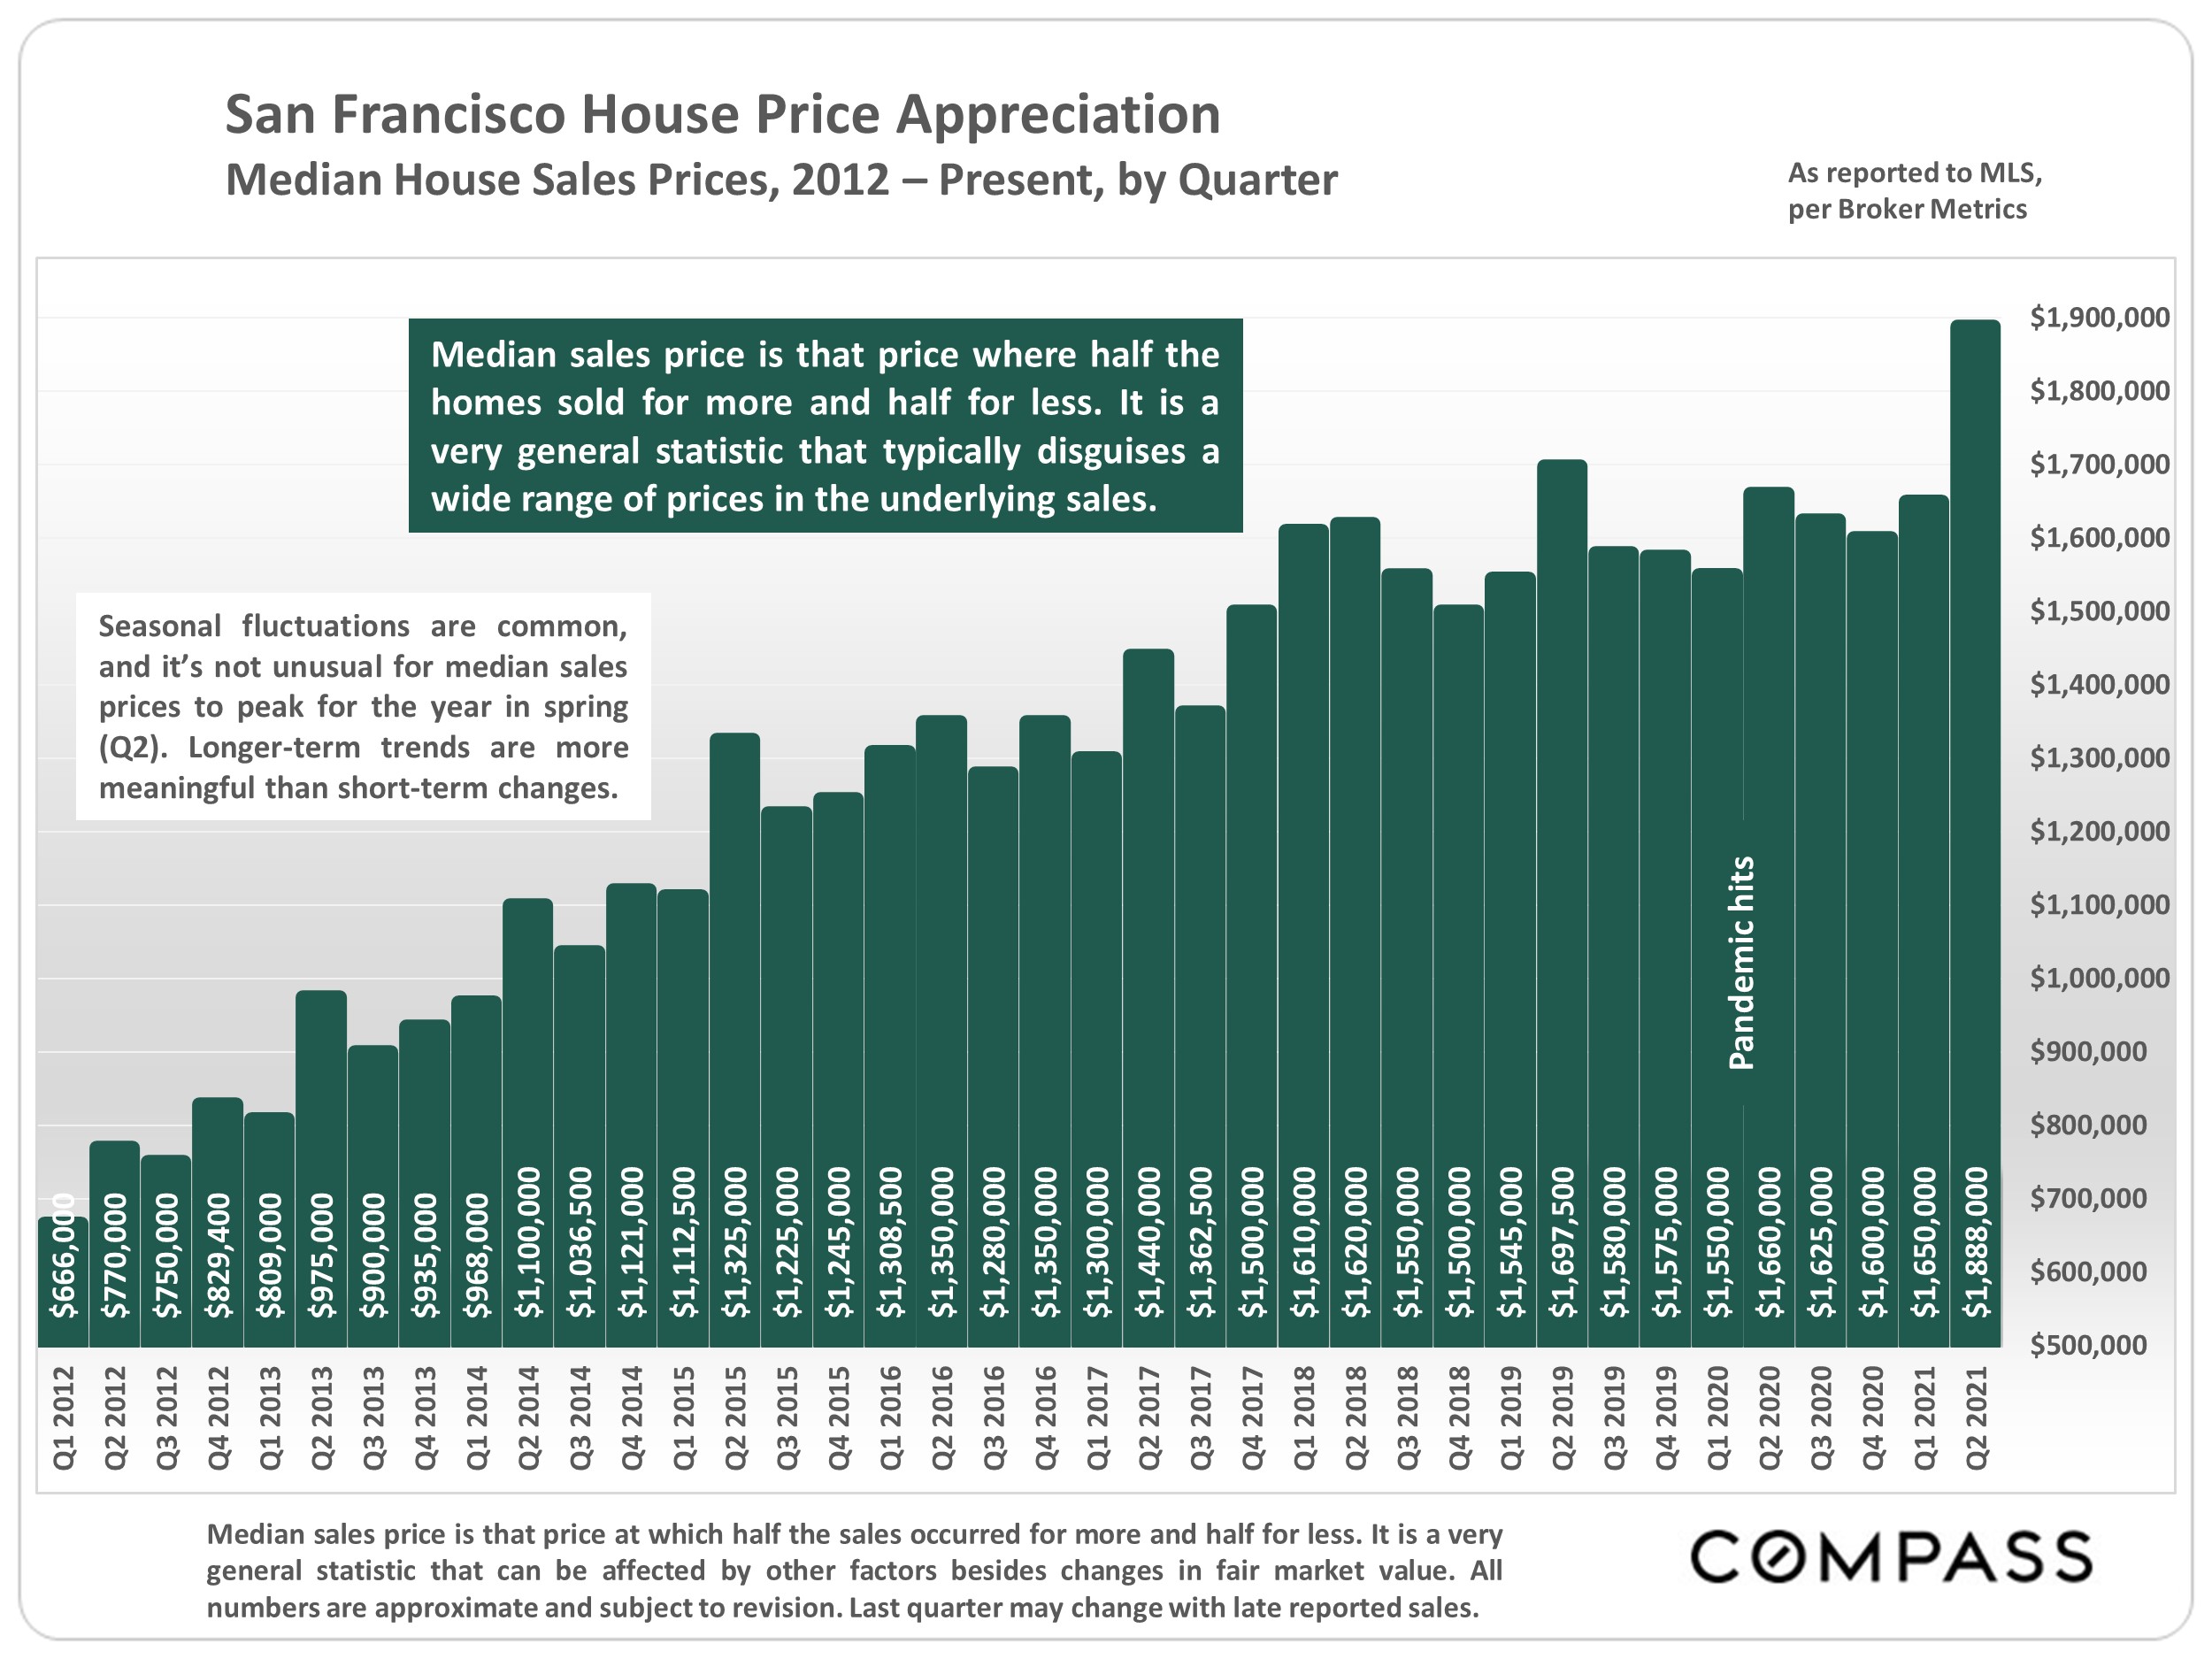 Graph of San Francisco House Price Appreciation from 20120 to Present